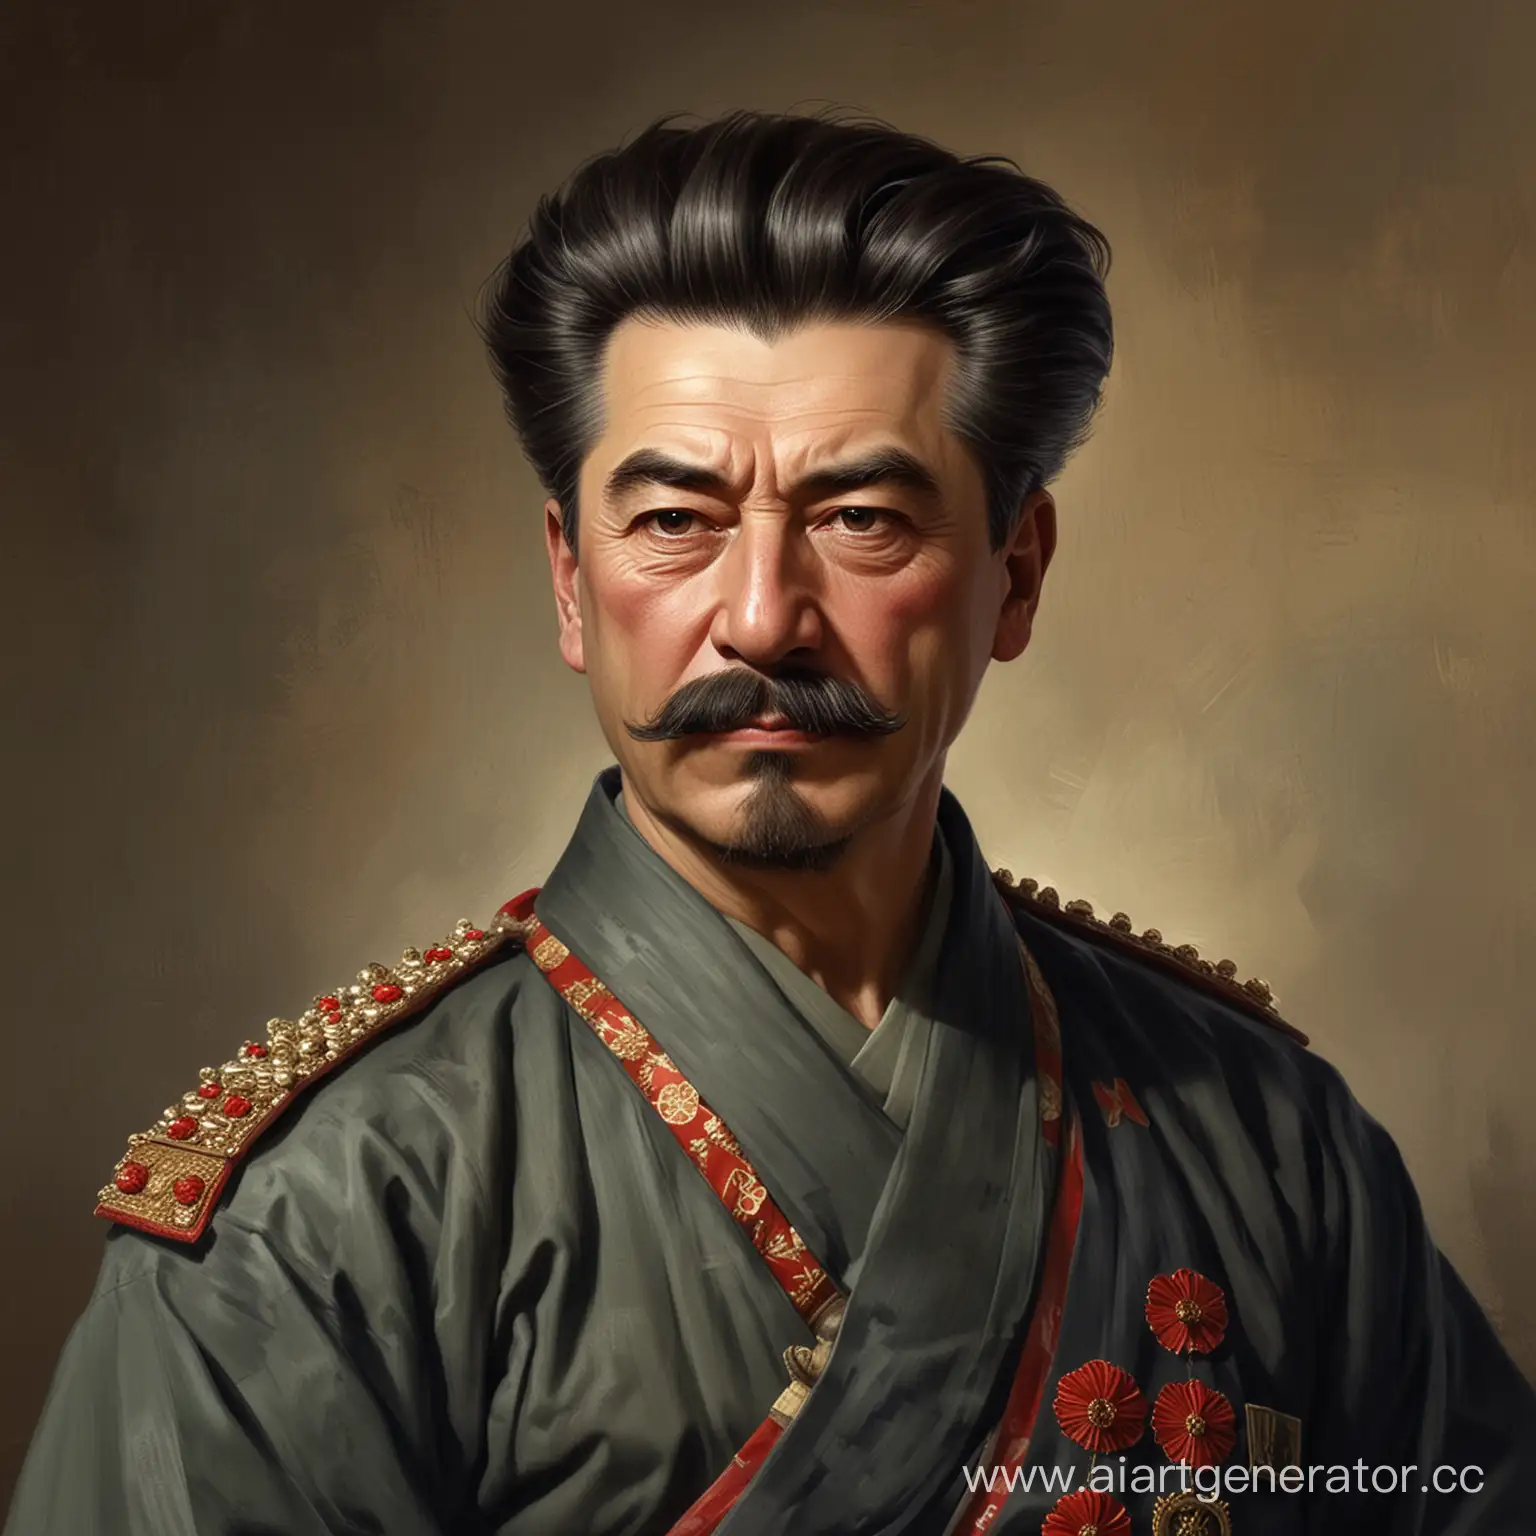 Stalin-Samurai-in-Dramatic-Pose-with-Traditional-Sword